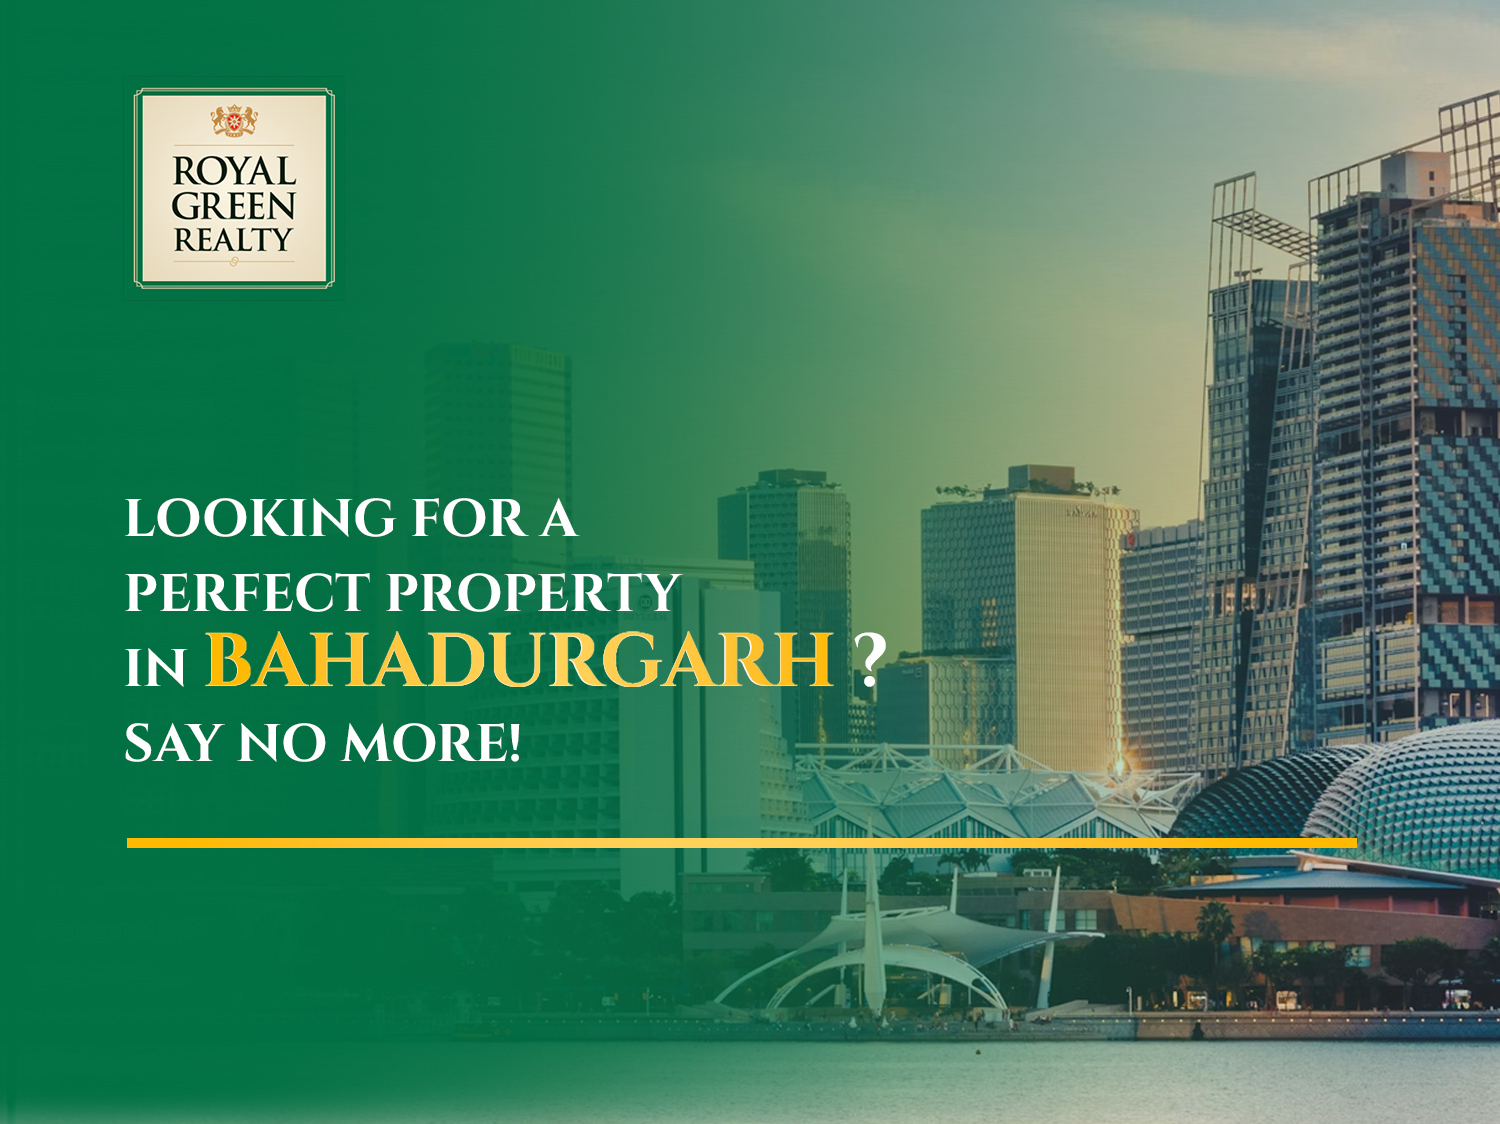 Looking for a perfect property in Bahadurgarh? Say no more!